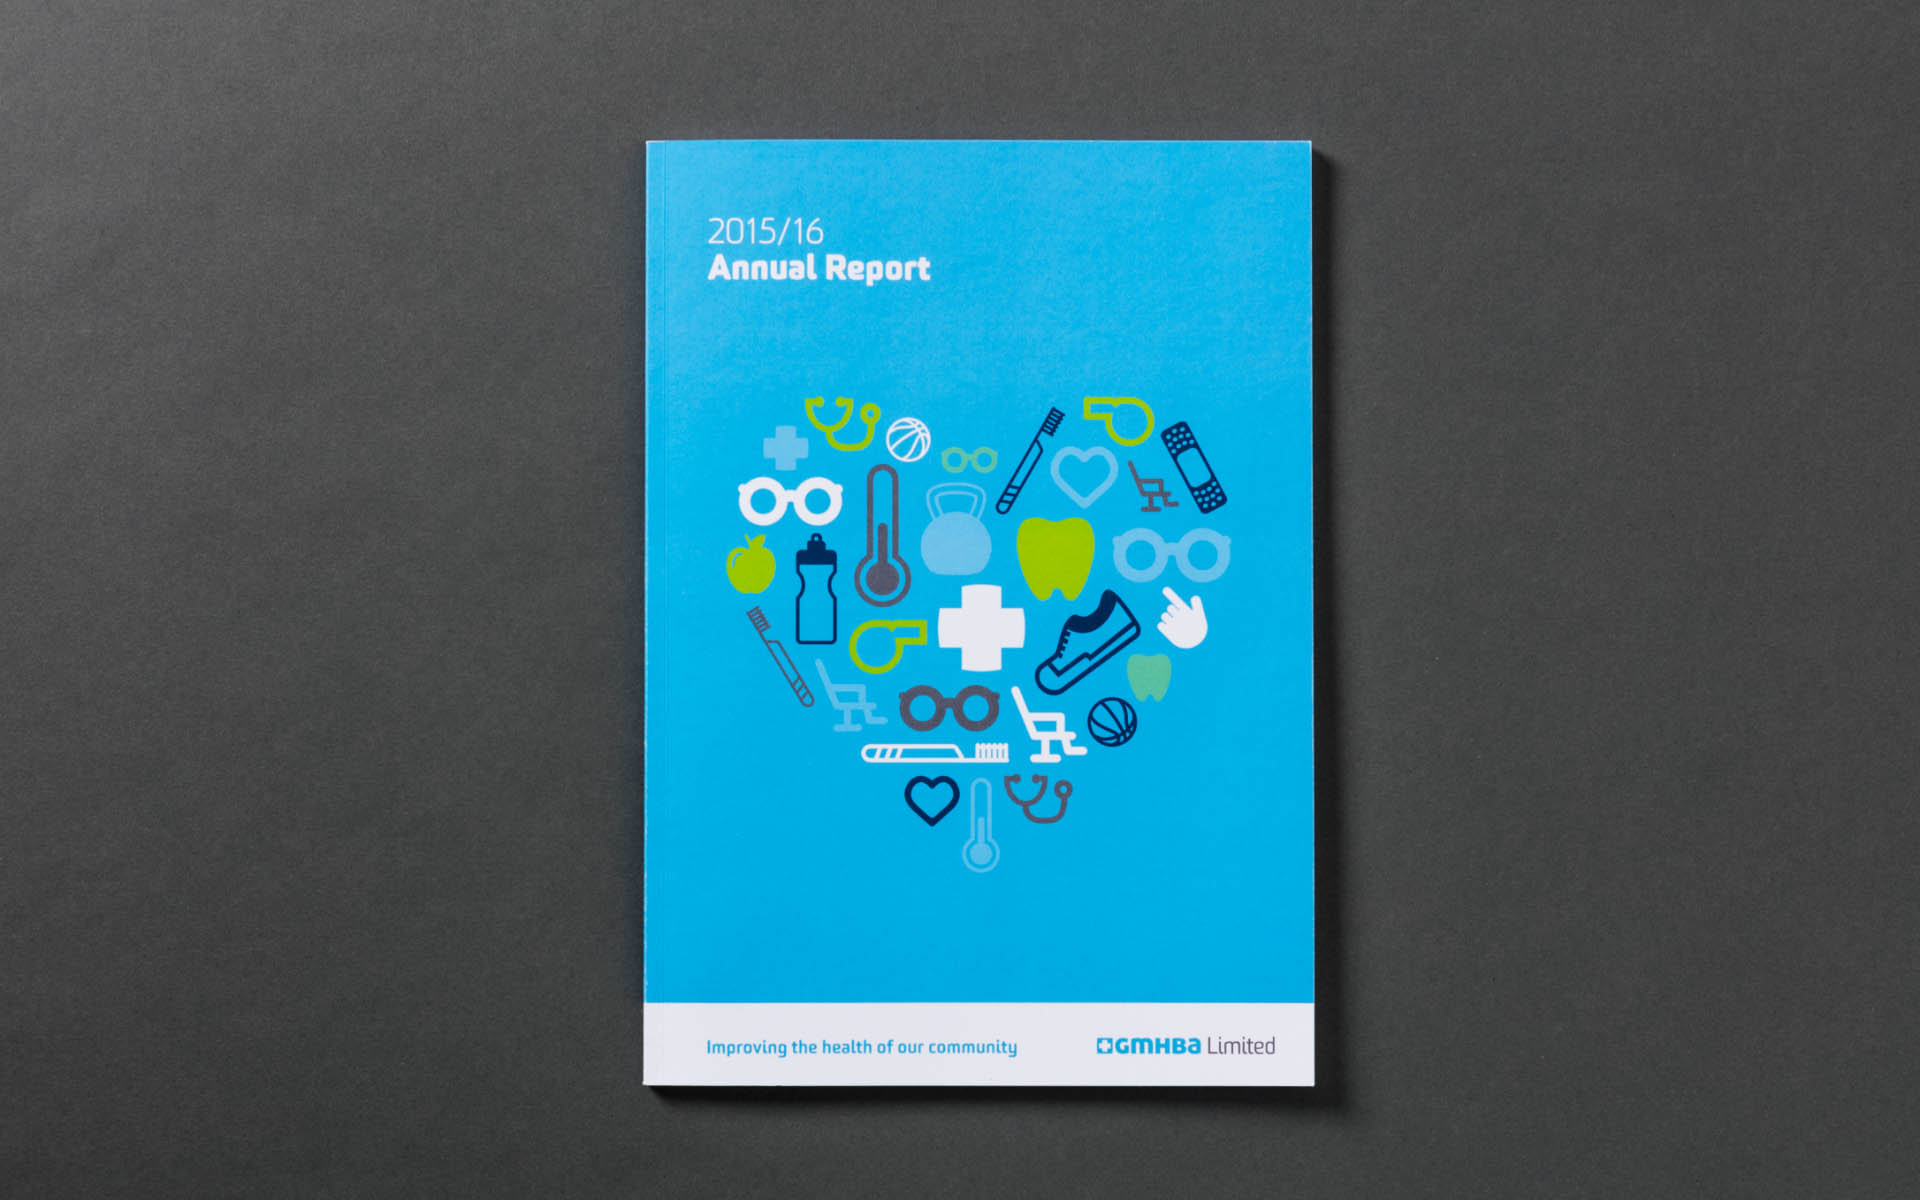 GMHBA printed annual report booklet